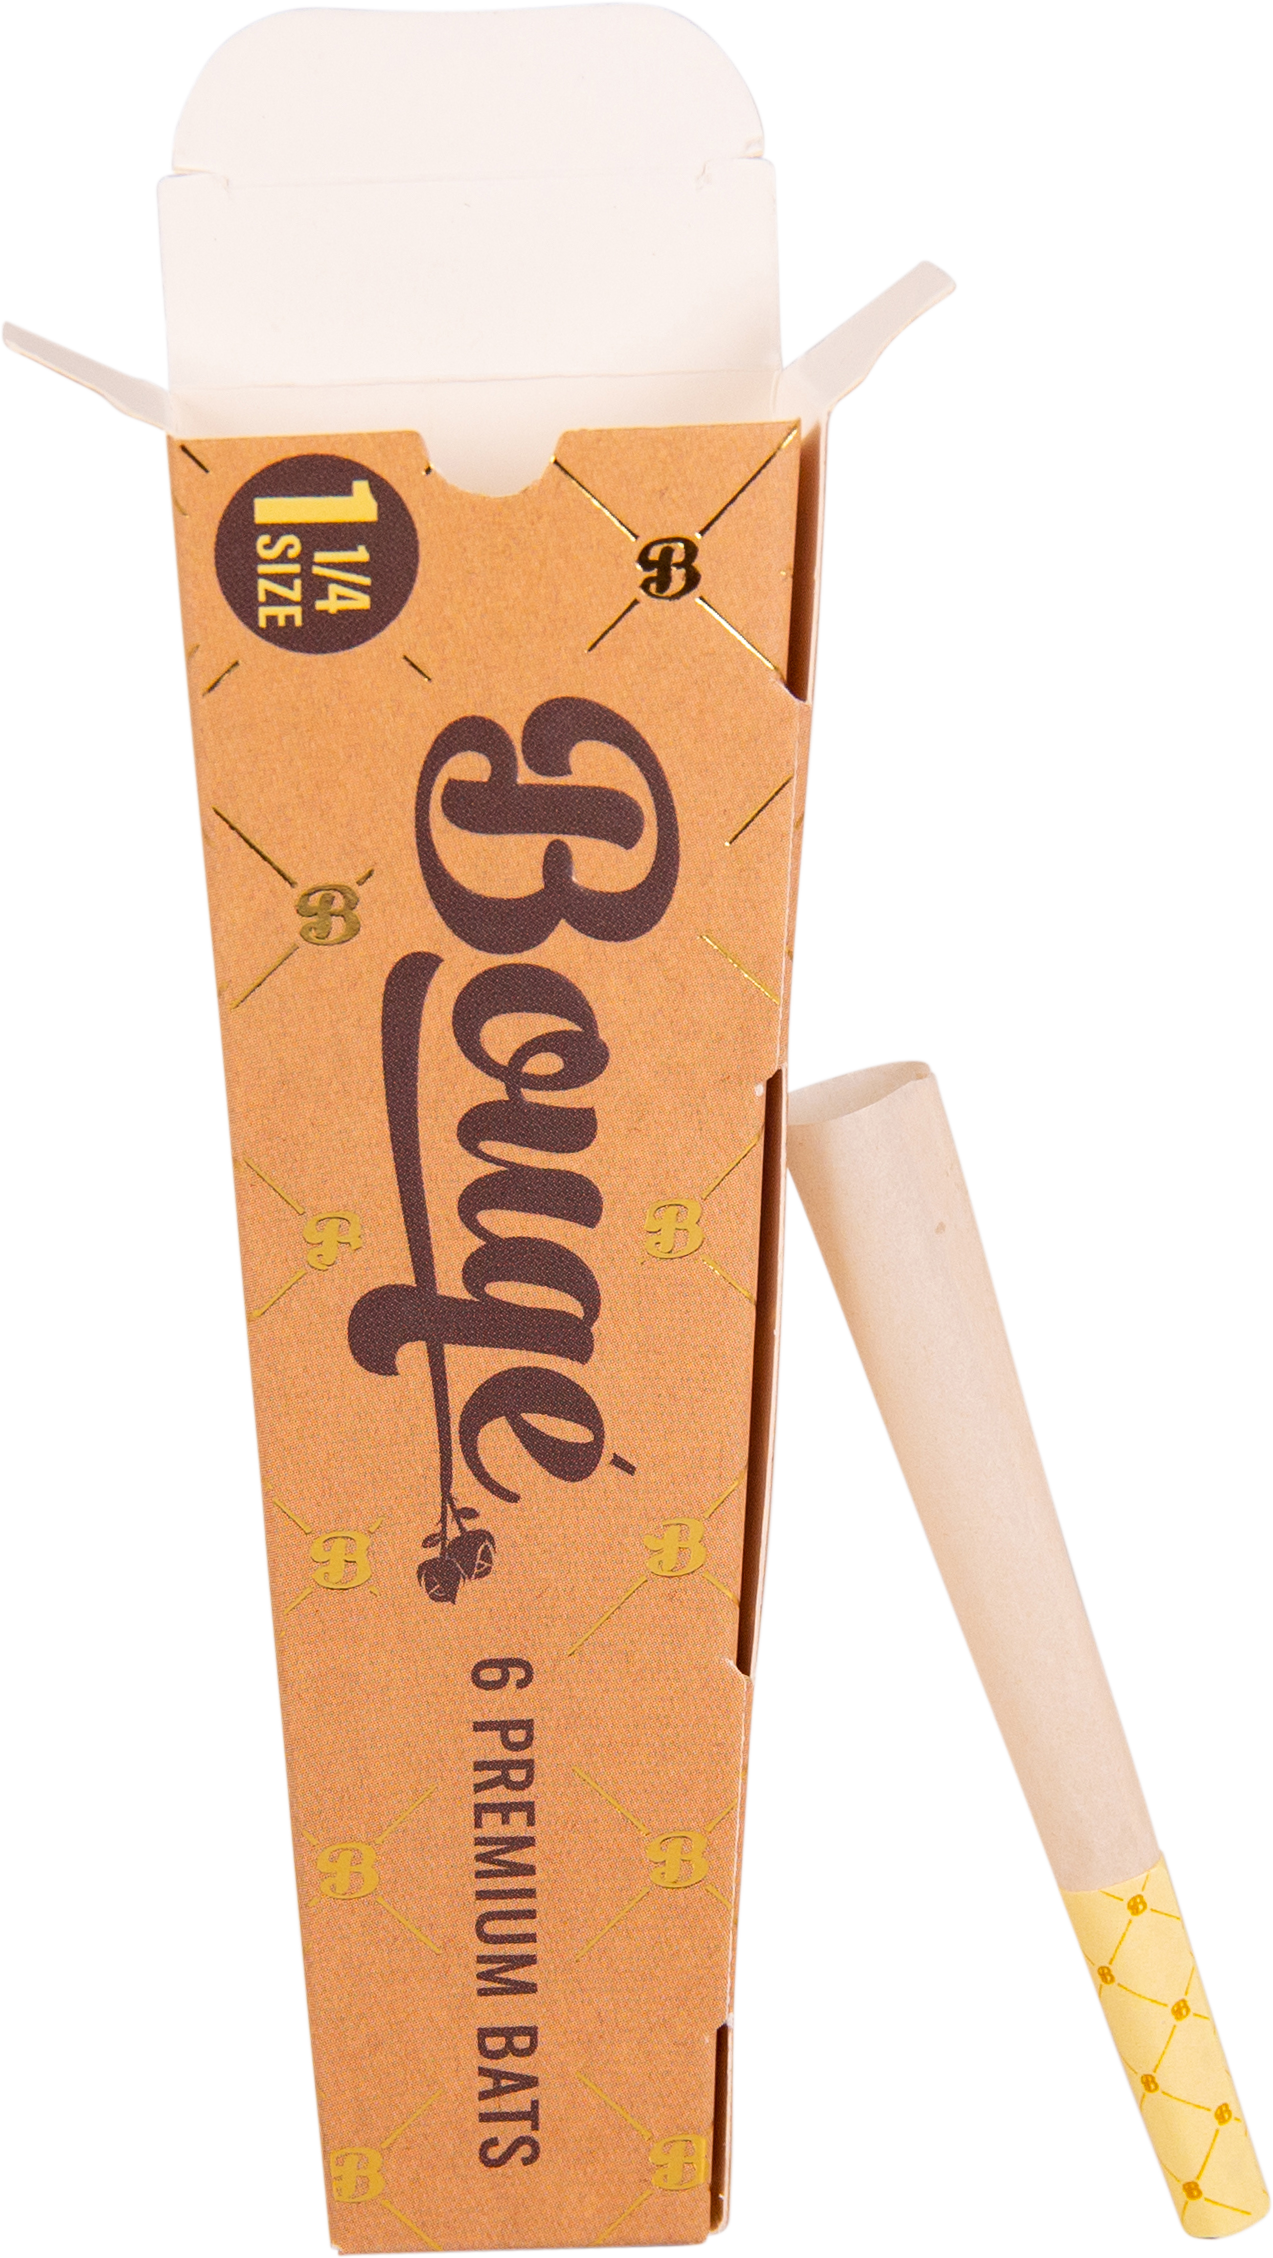 A boque promotional pack with a custom branded pre-rolled cone leaning against it